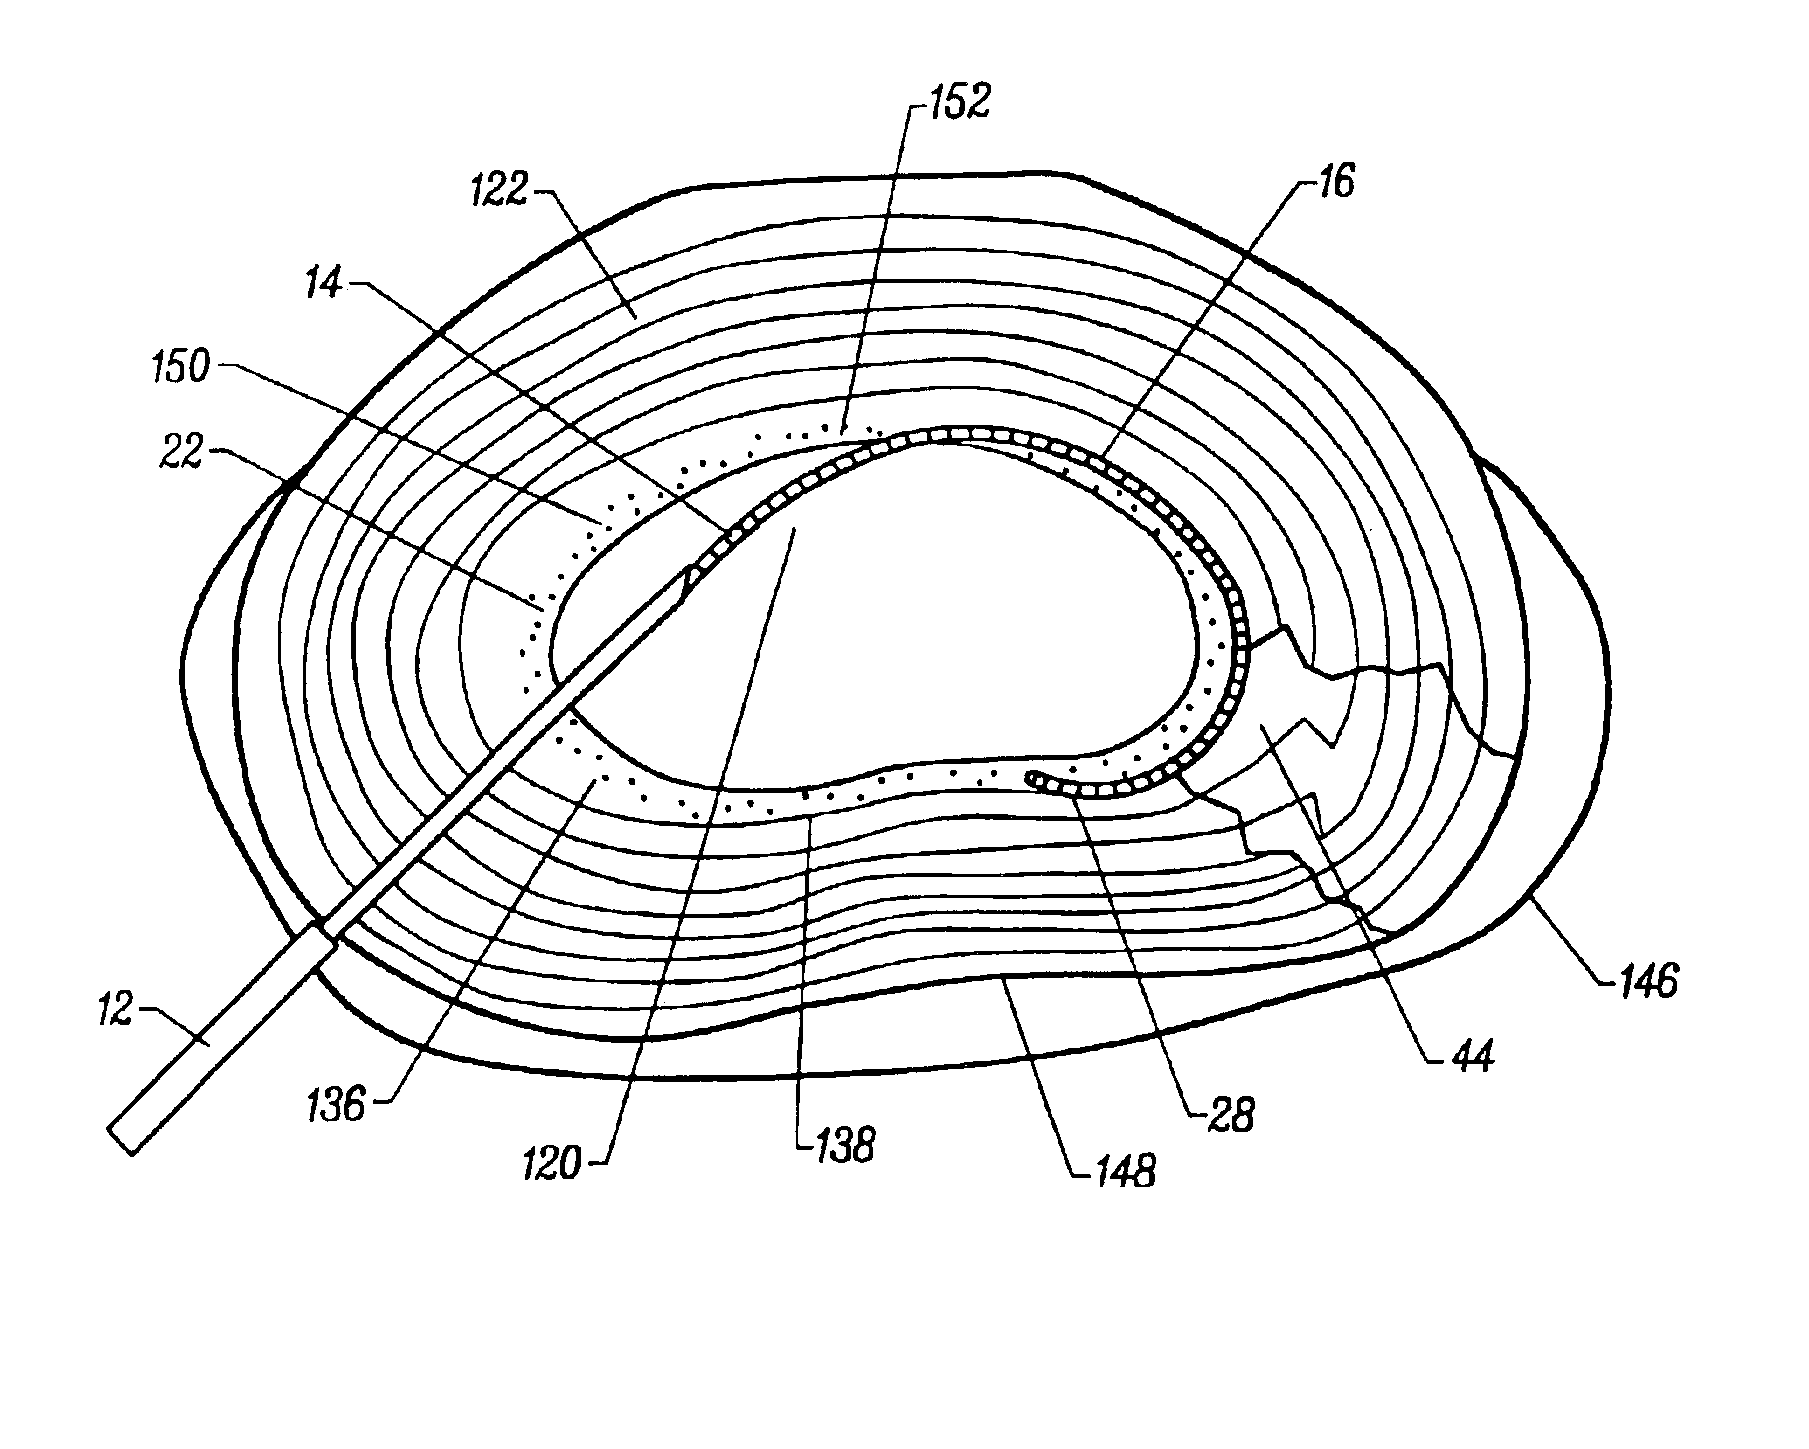 Method and apparatus for treating annular fissures in intervertebral discs